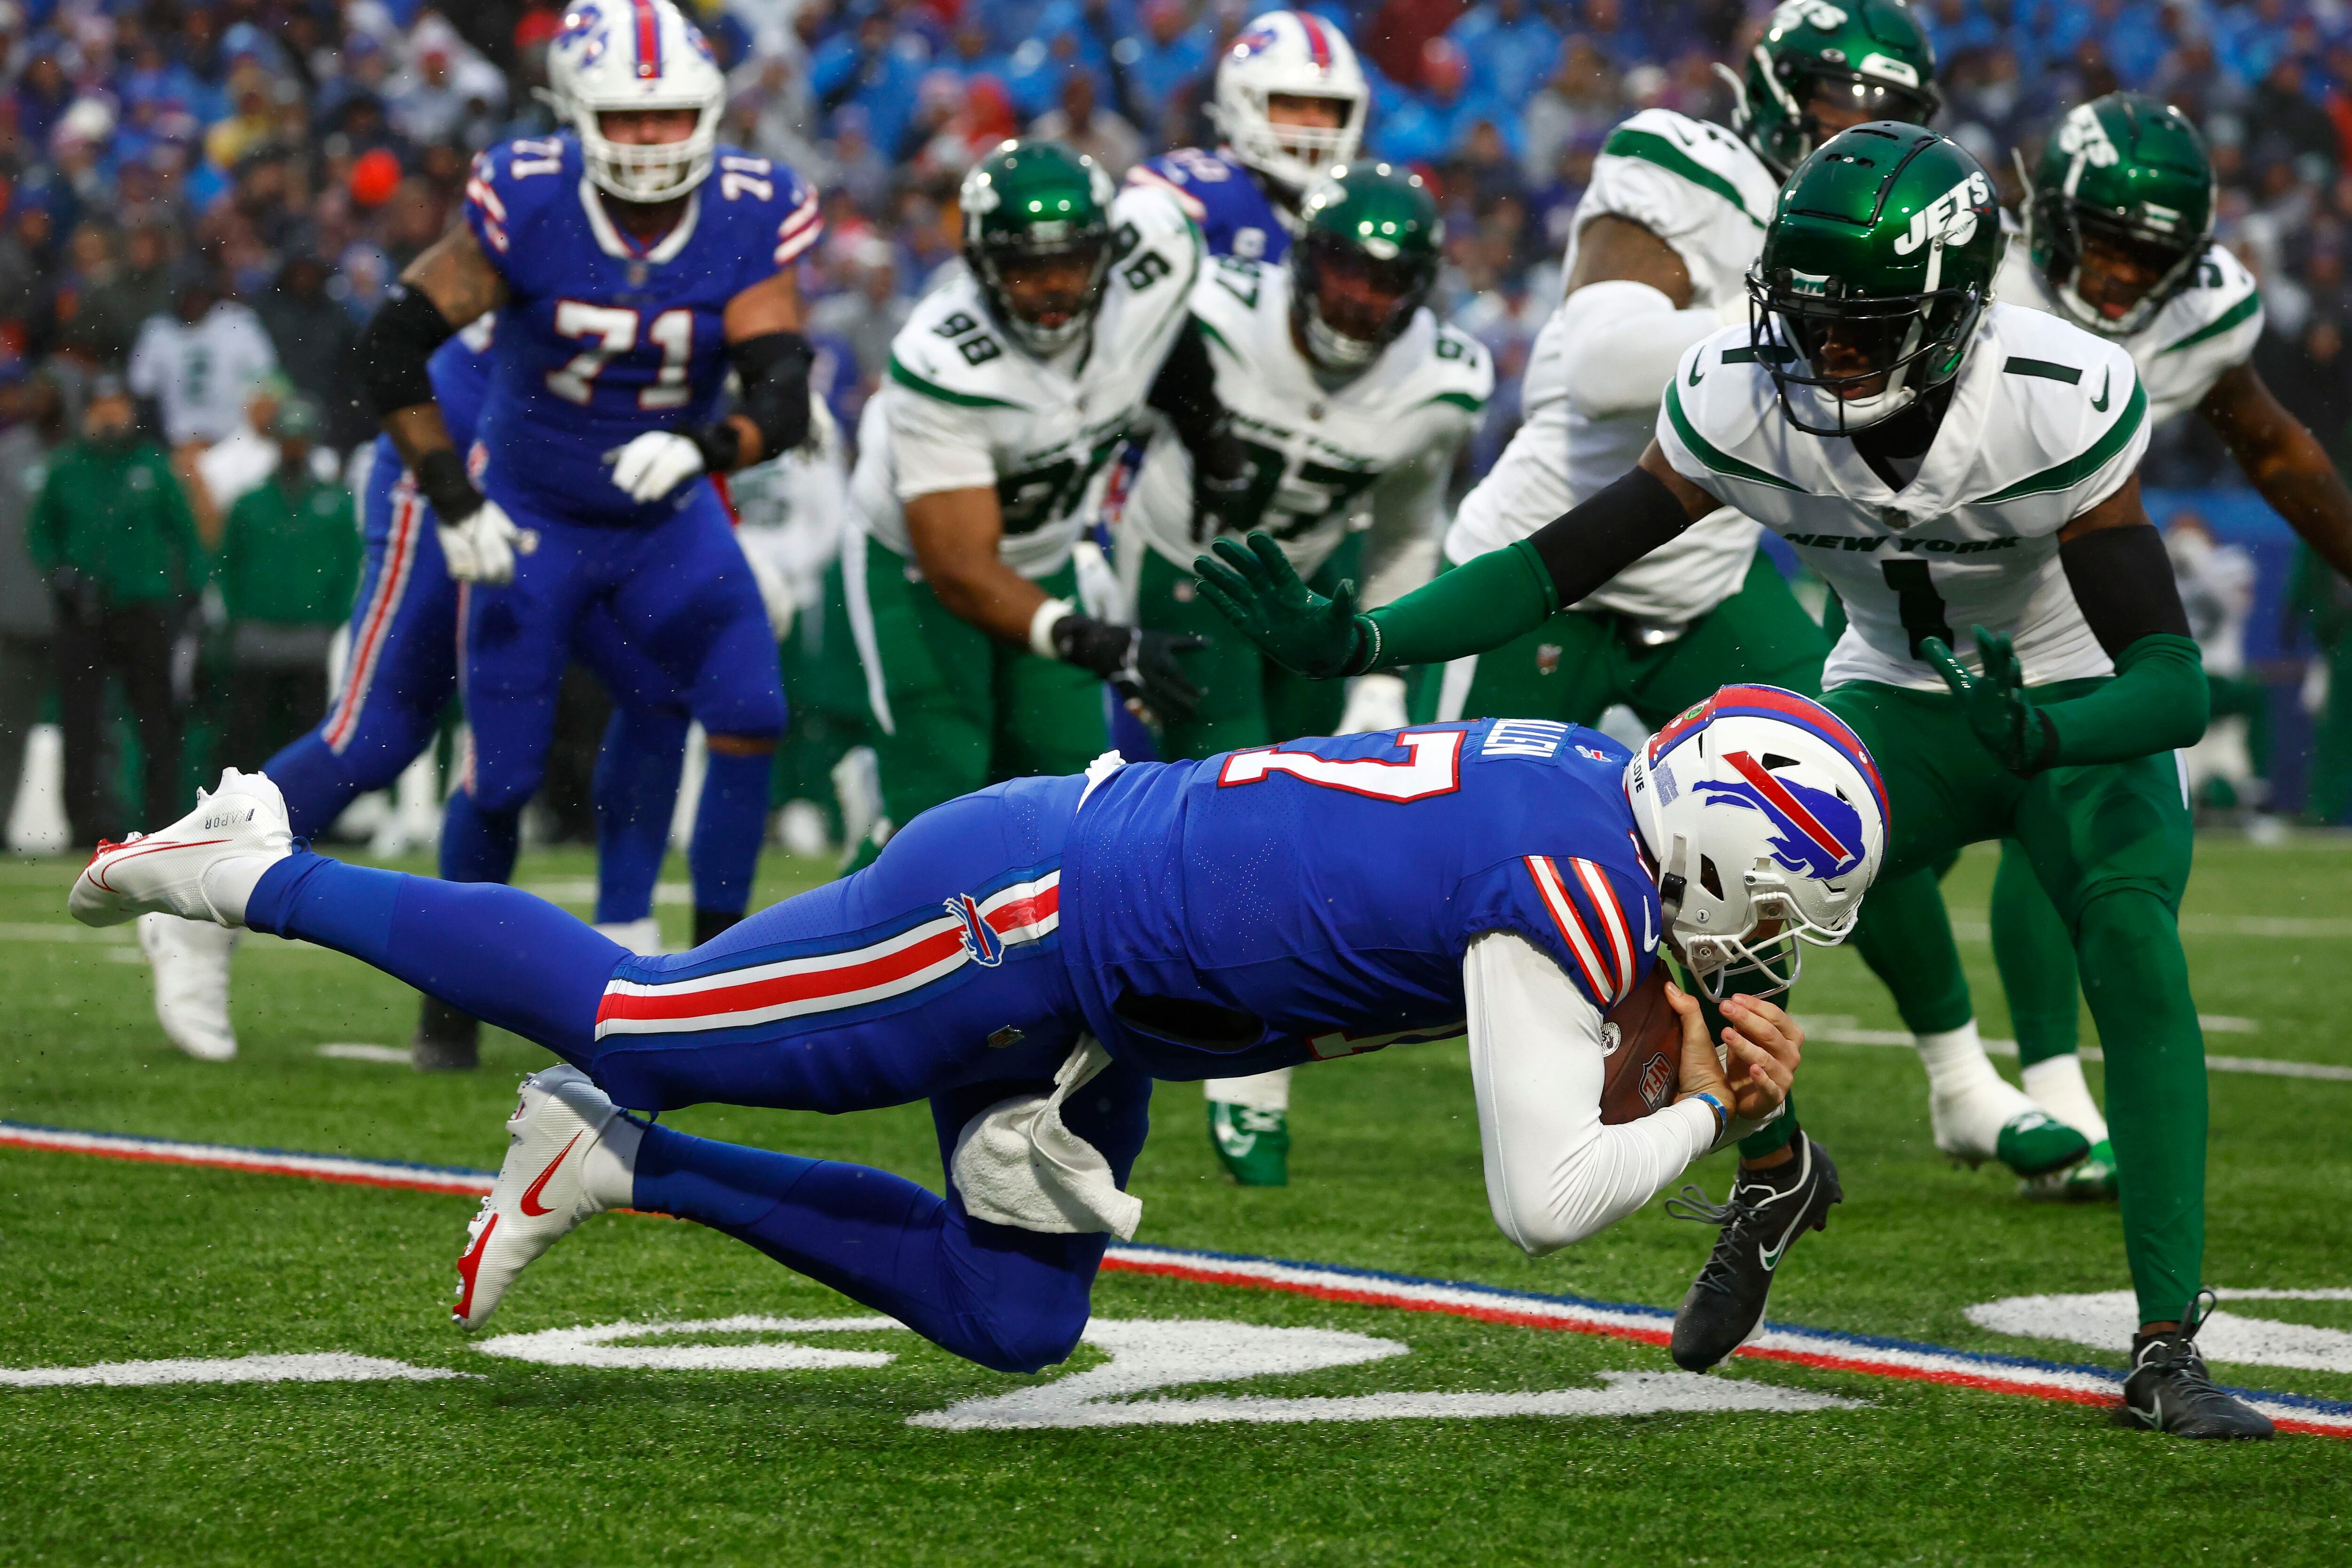 NY Jets cannot overcome injuries, turnovers, lose 20-12 to Bills